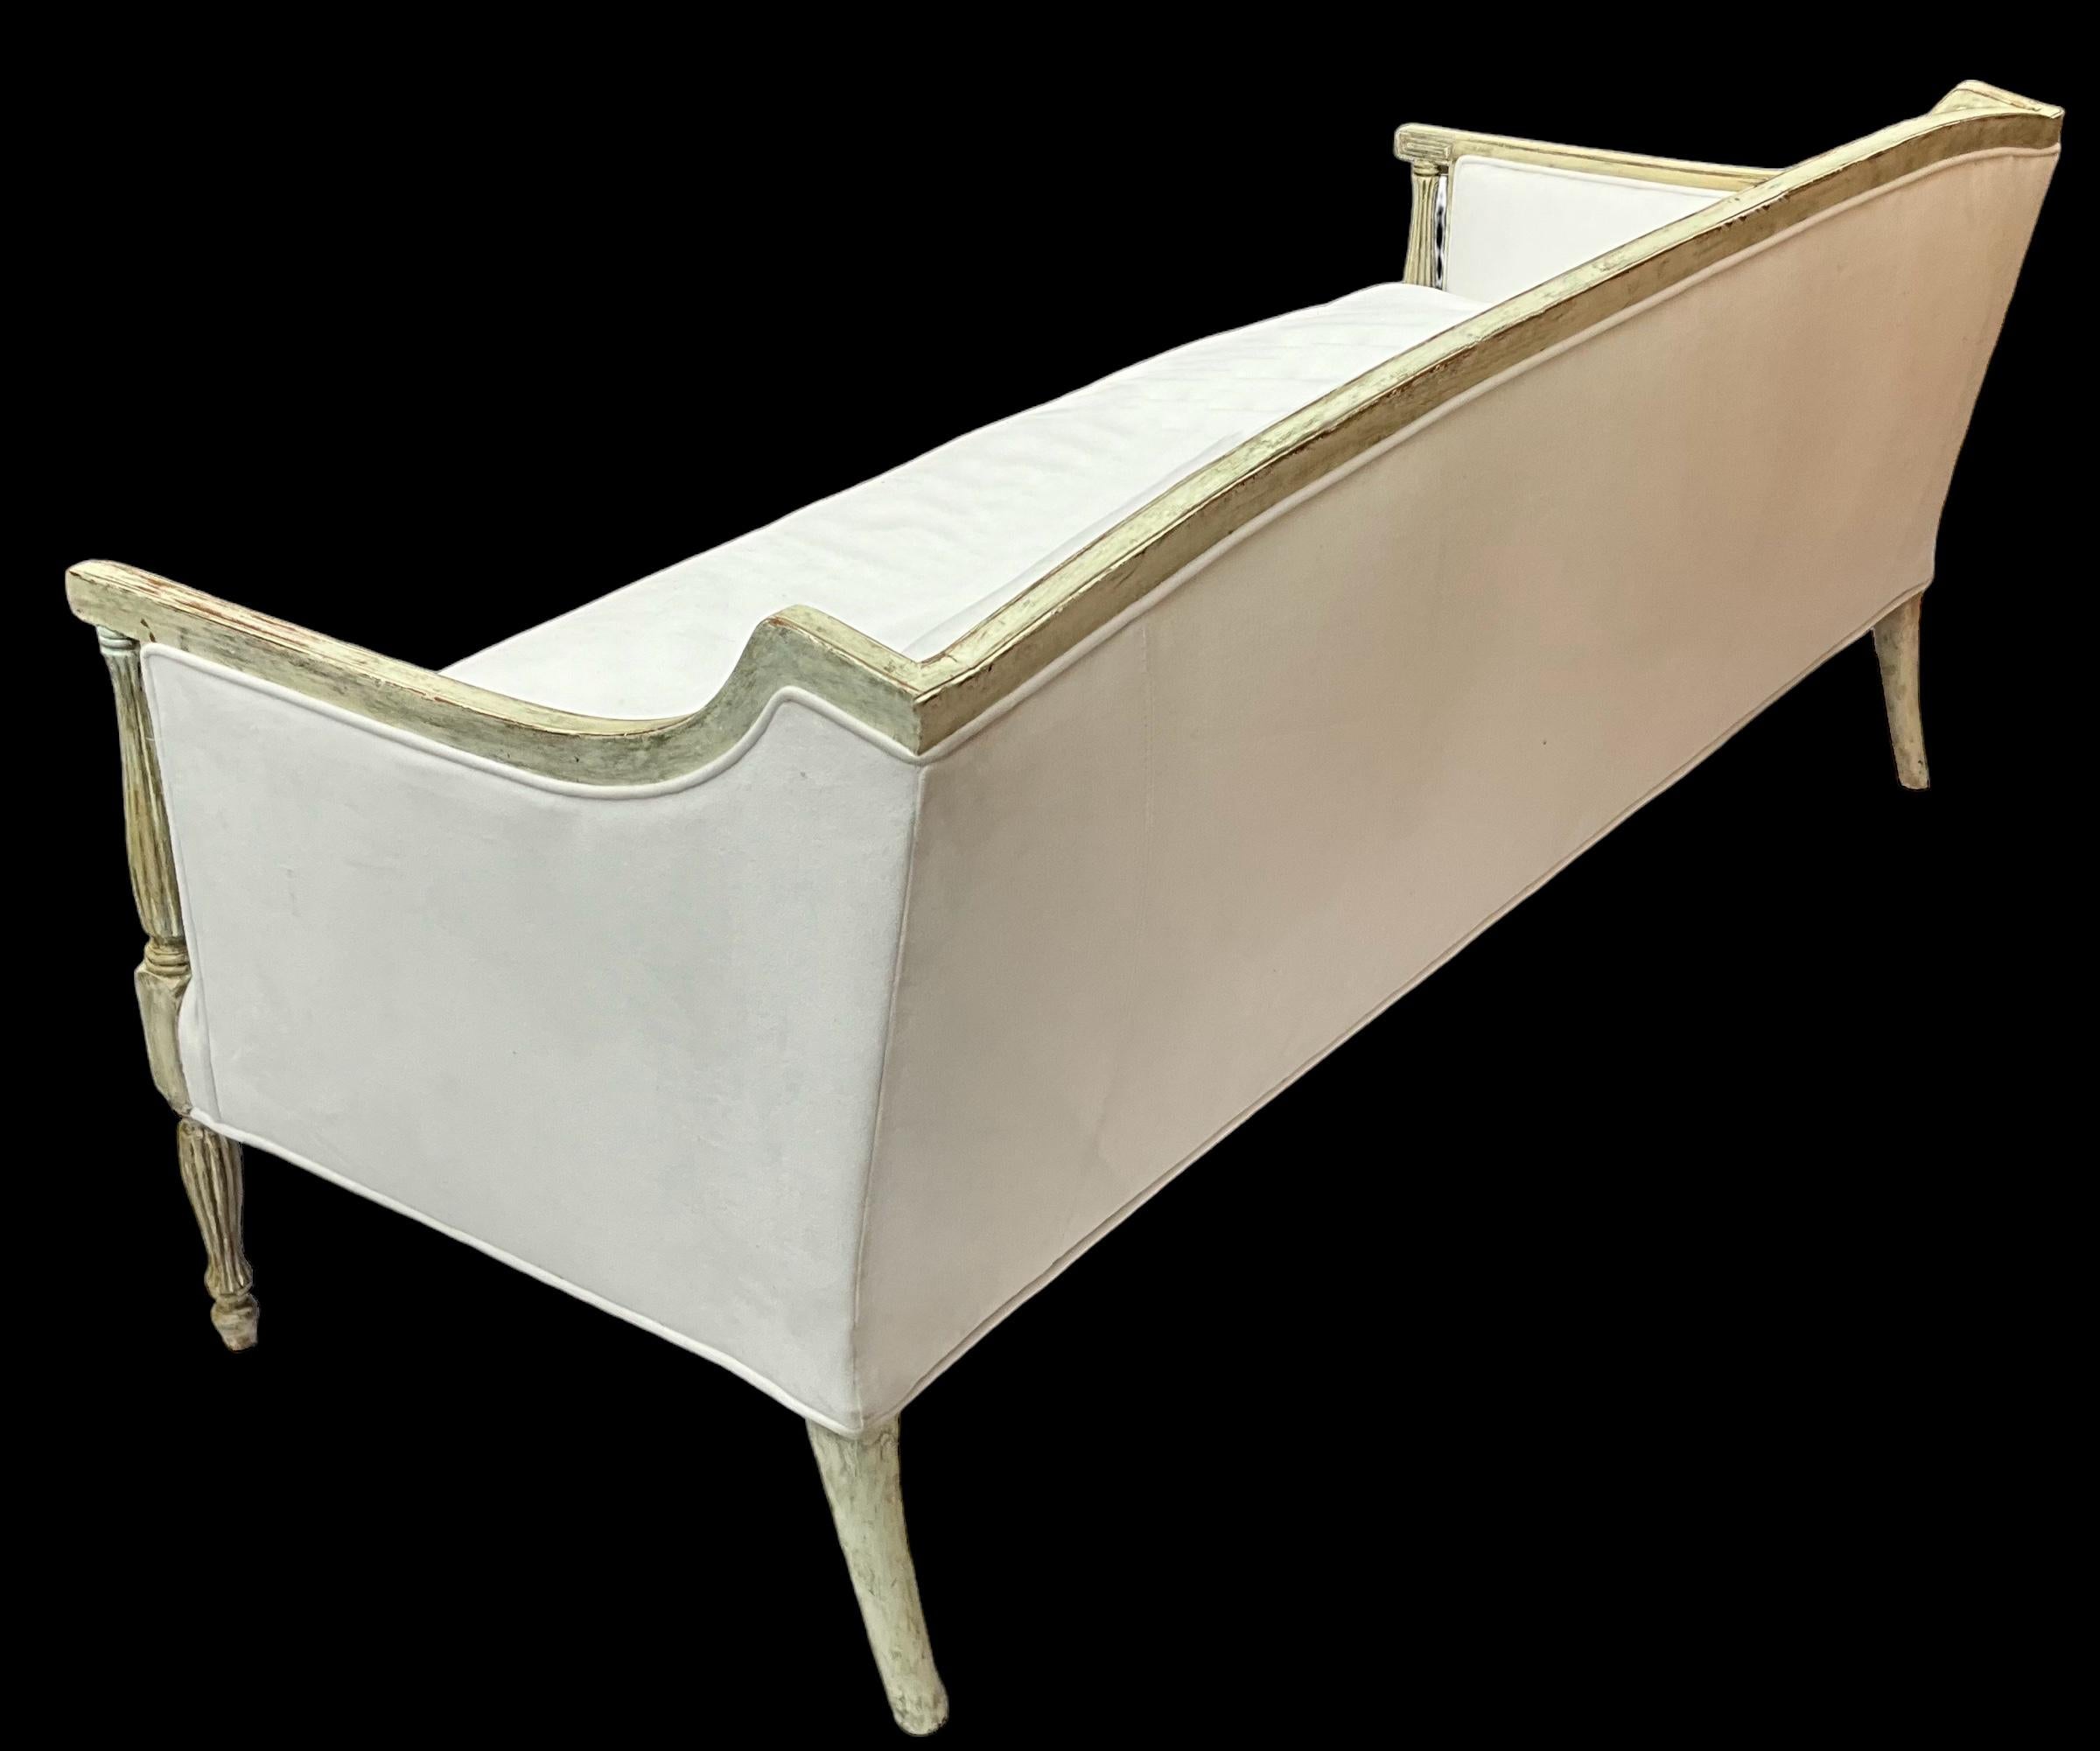 20th Century Early 20th-C. Federal Style Sofa W/ Painted Gustavian Finish & White Upholstery 